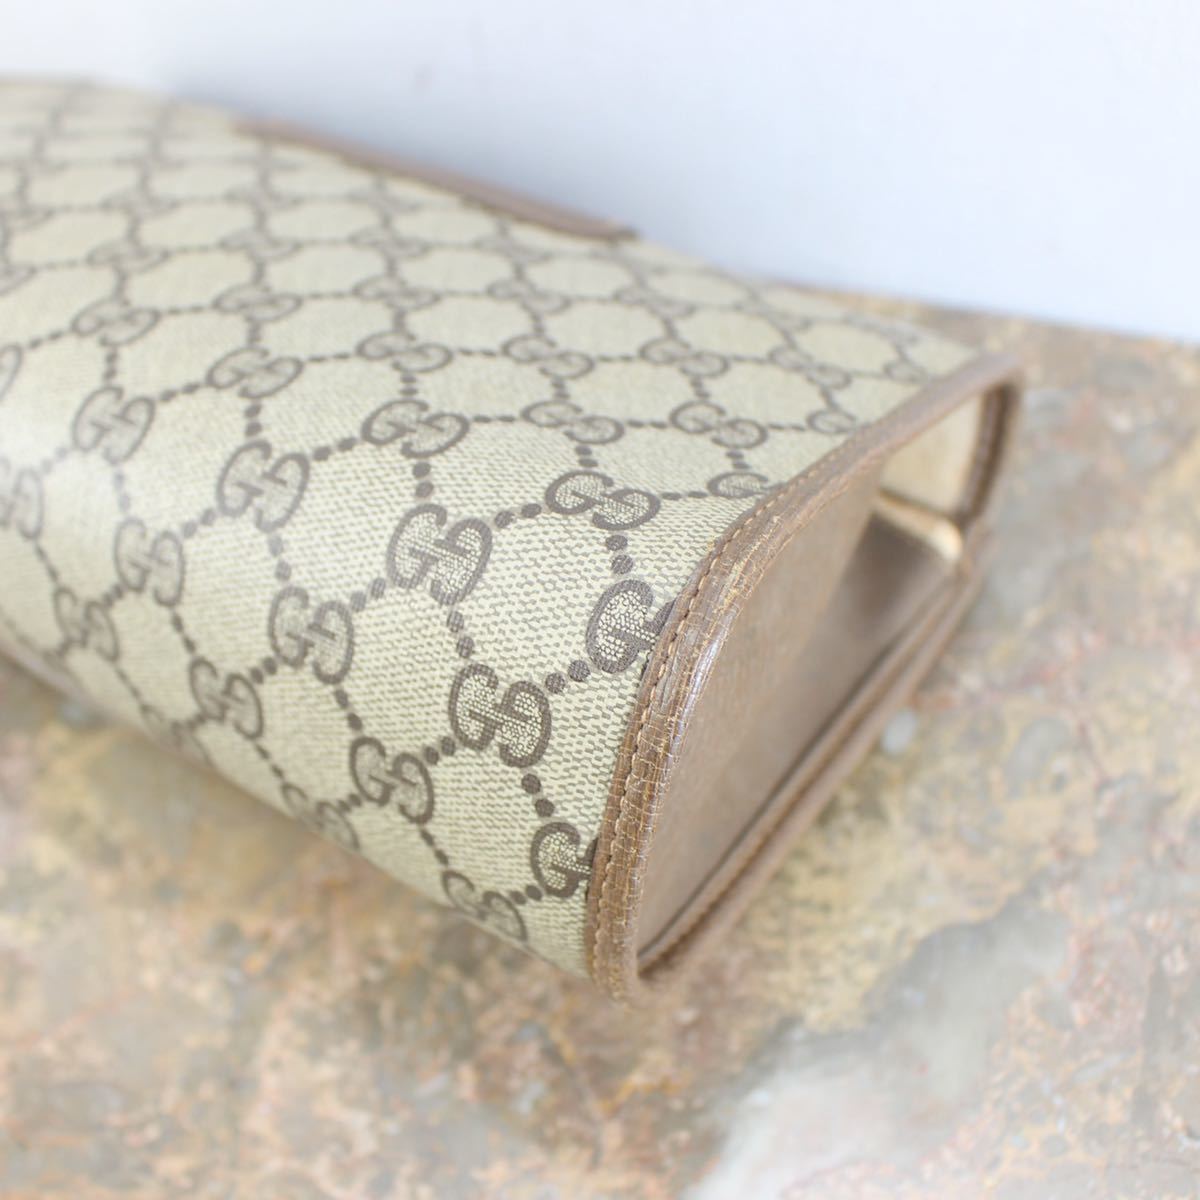 OLD GUCCI SHERRY LINE GG PATTERNED CLUTCH BAG MADE IN ITALY/オールドグッチシェリーラインGG柄クラッチバッグ_画像5